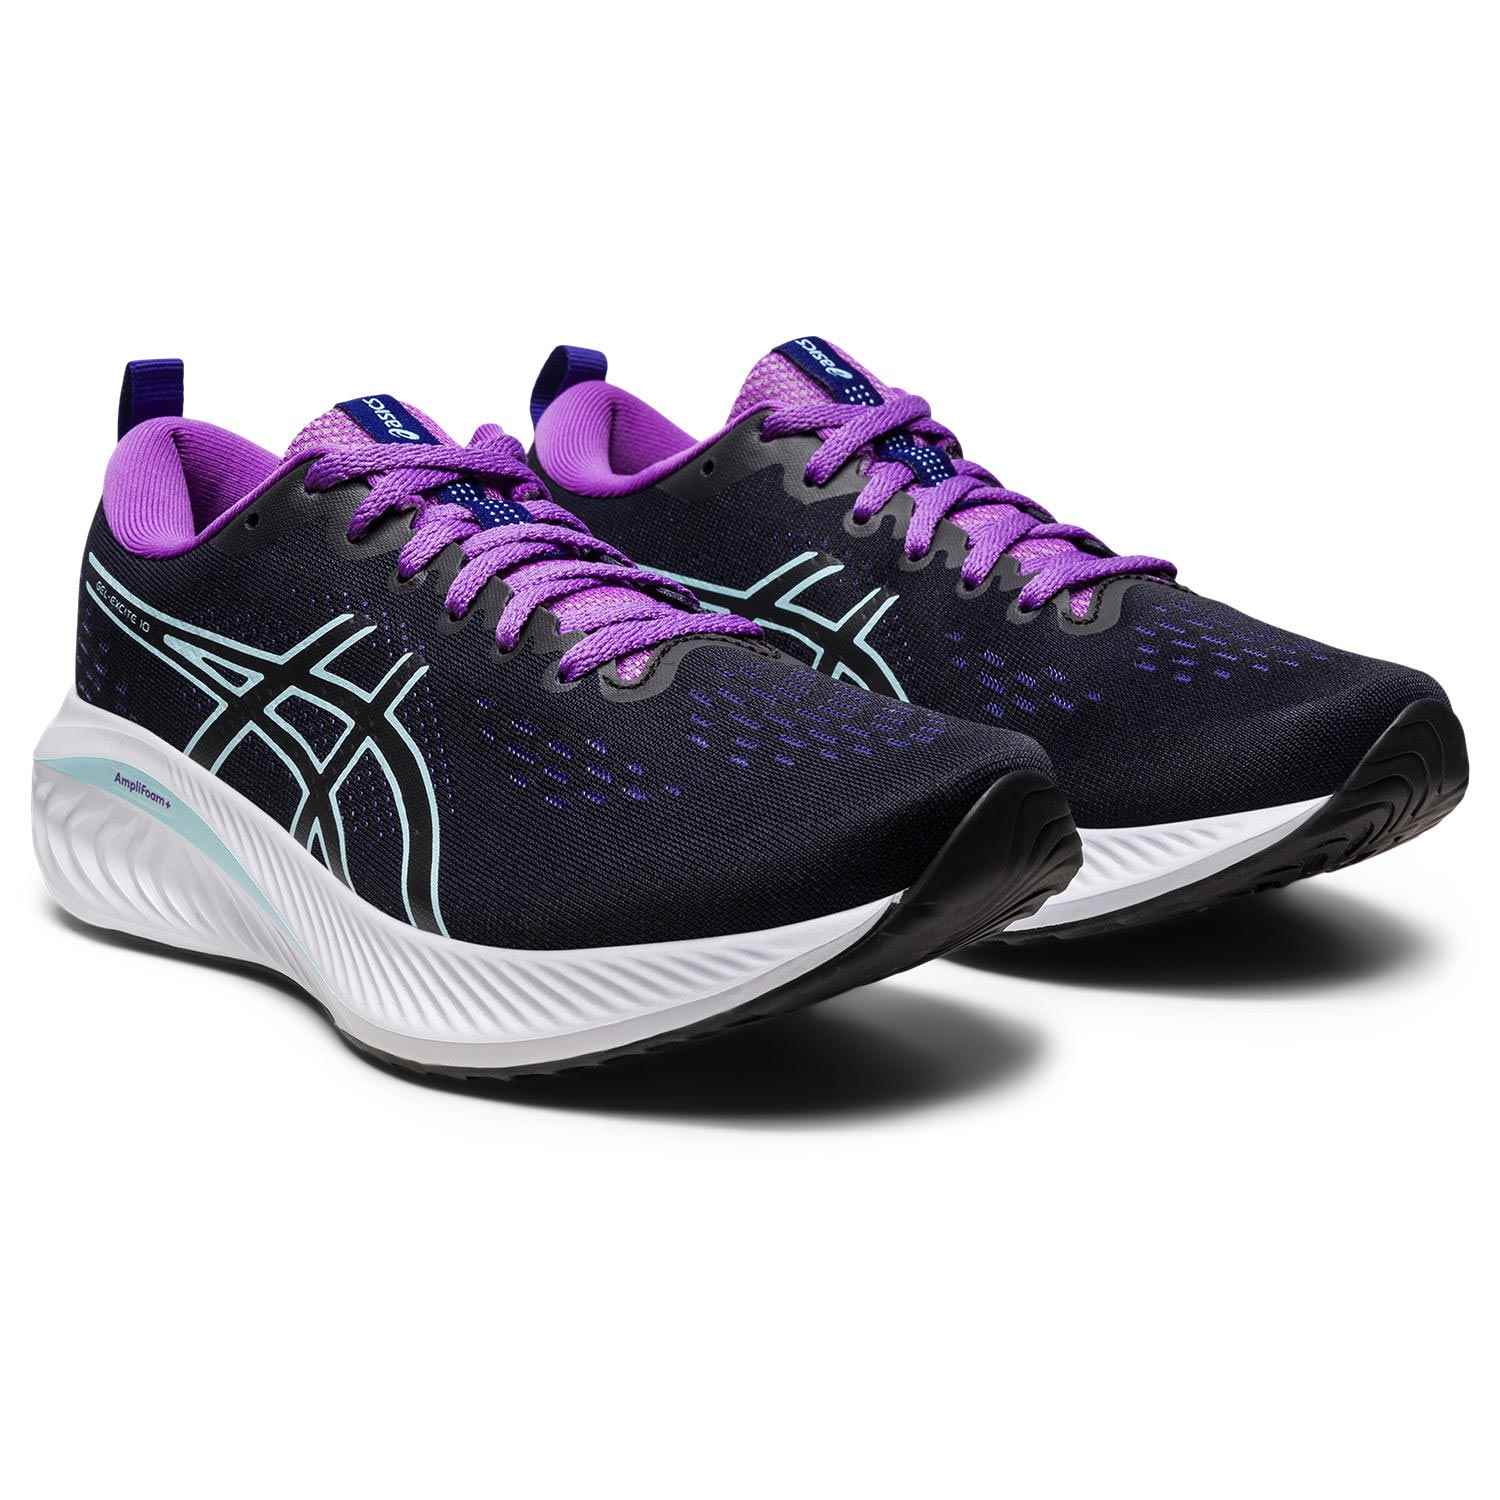 ASICS GEL EXCITE 10 WOMENS RUNNING SHOES